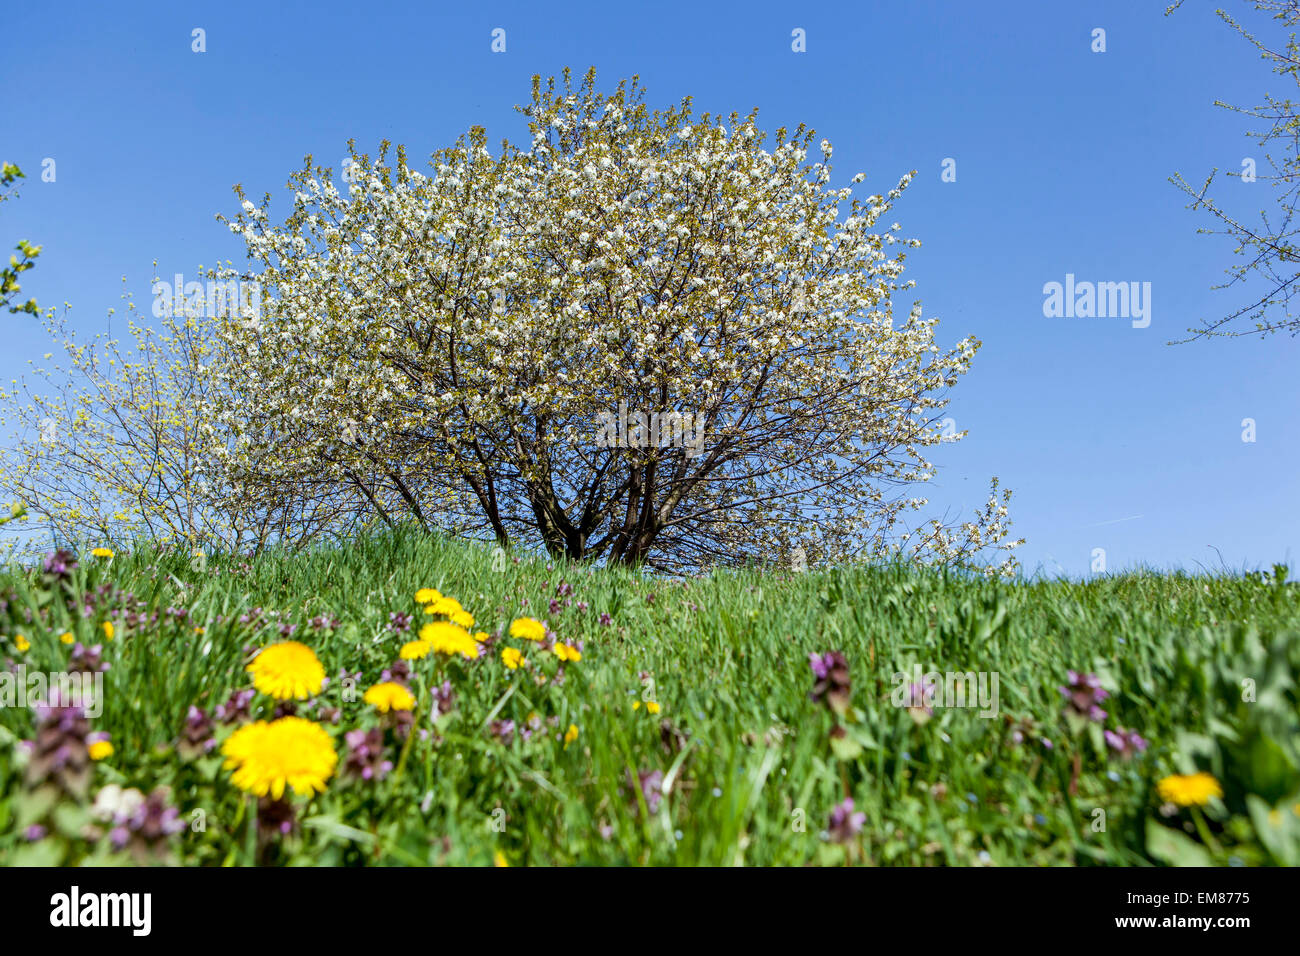 Blossoming cherry tree grass flowers sky spring meadow lawn dandelion flower, deciduous tree spring Stock Photo